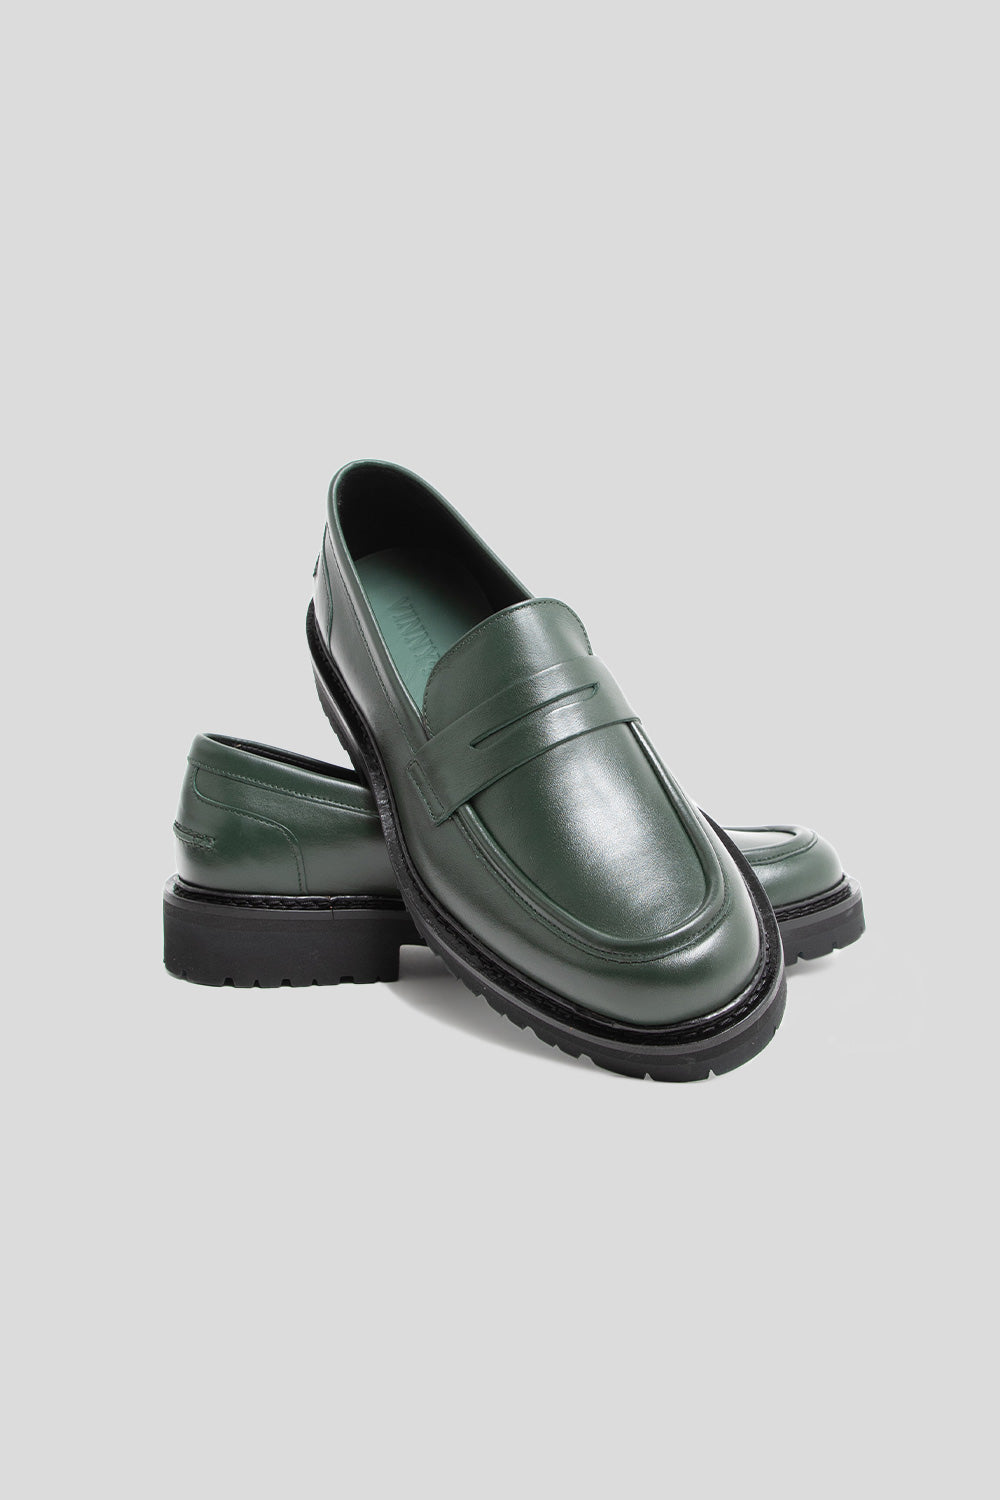 Vinny's Richee Penny Loafer in Basil Green | Wallace Mercantile Shop